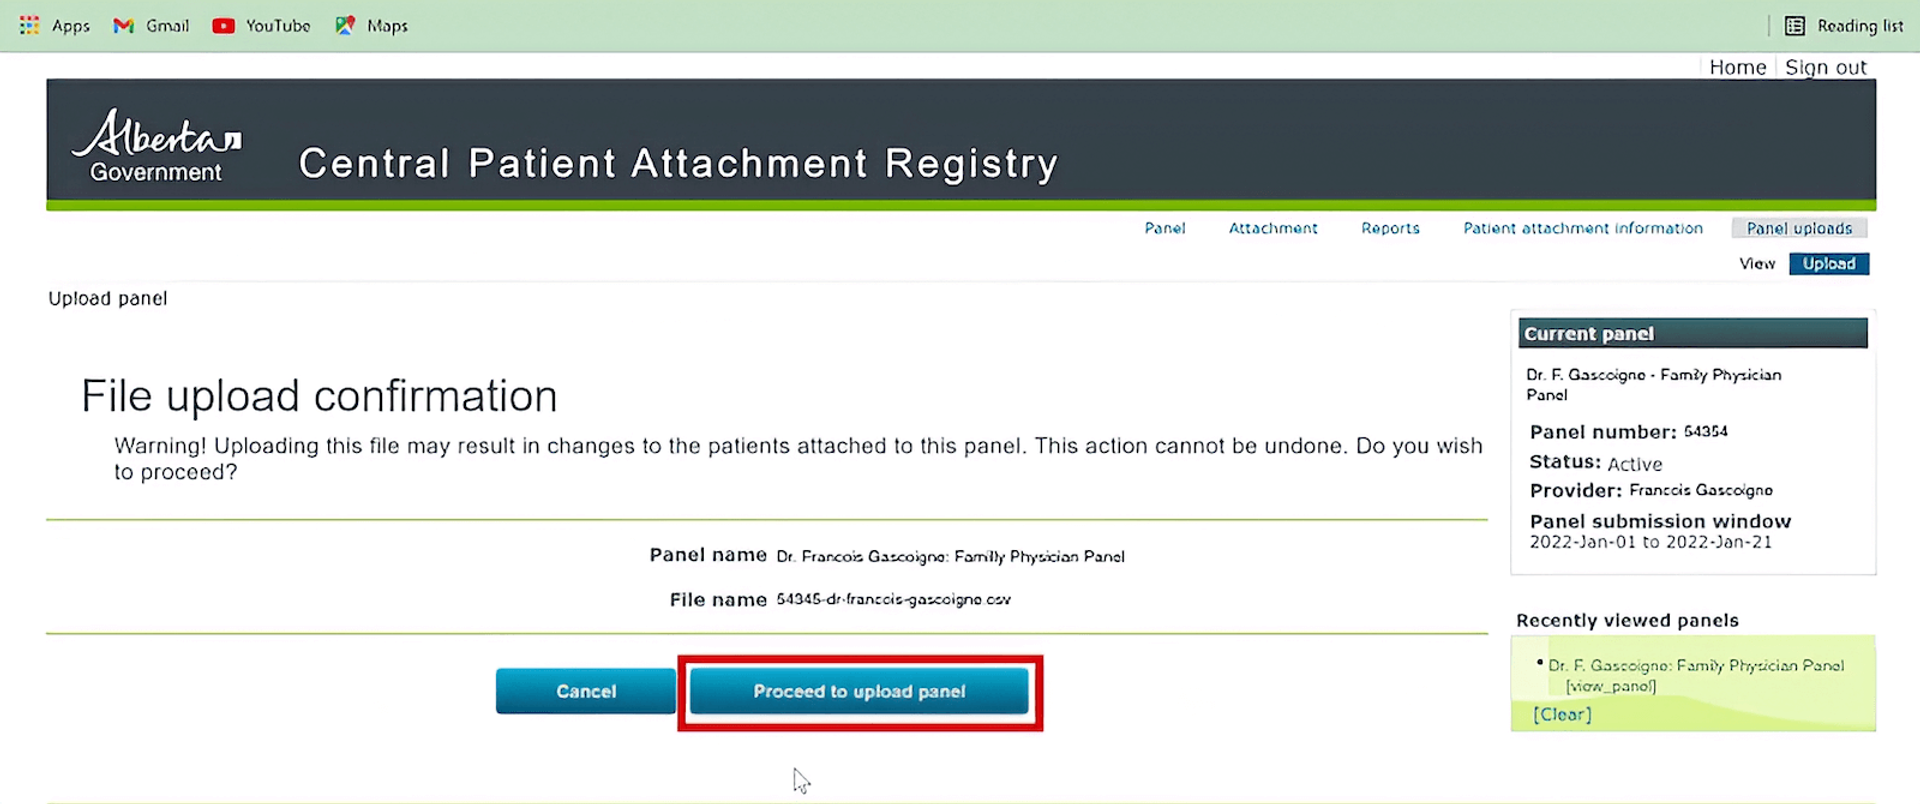 Screenshot of the Alberta Government's central patient attachment registry, with a button labeled 'Proceed to upload portal' highlighted.